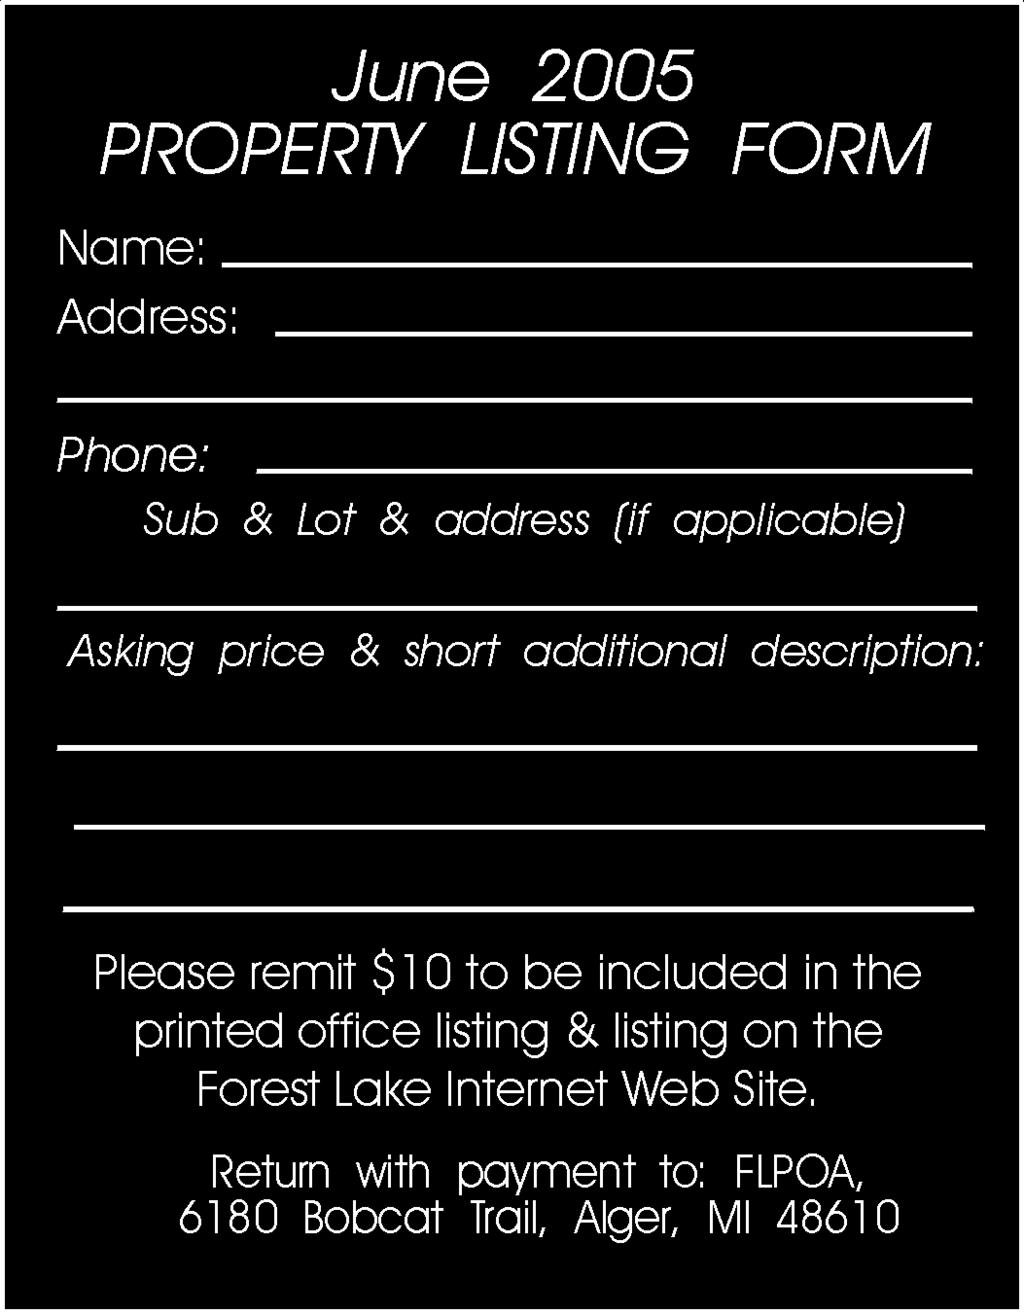 QUARTERLY PROPERTY LISTING FOR SALE BY OWNER!